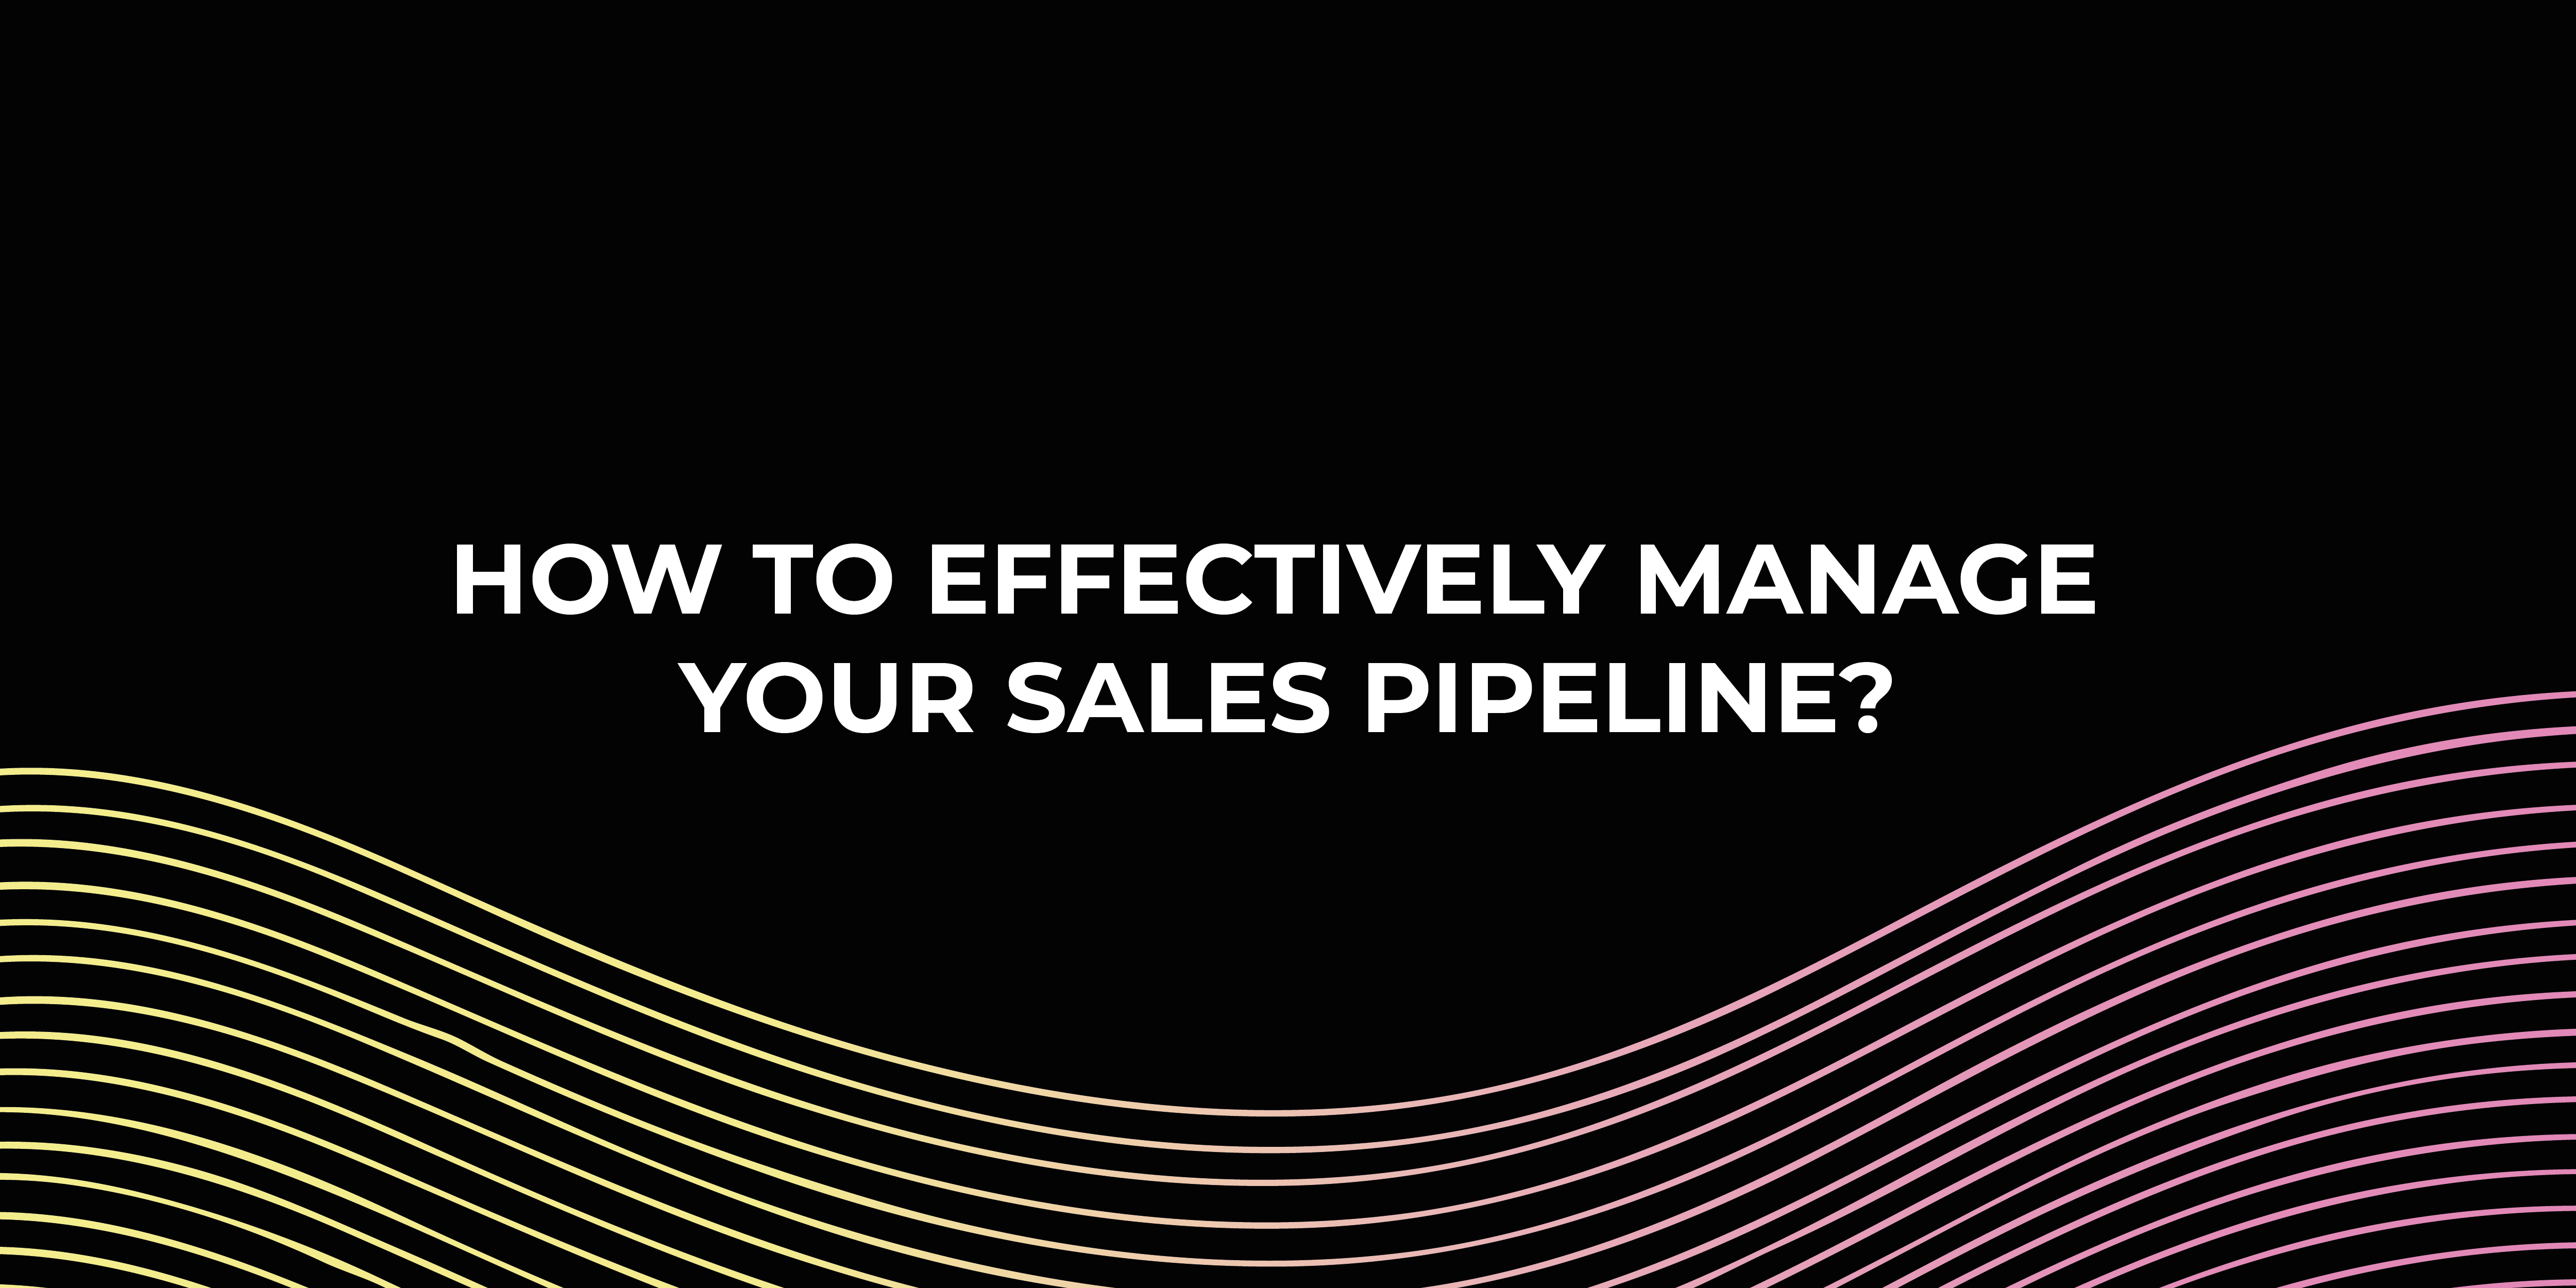 How to Effectively Manage Your Sales Pipeline?